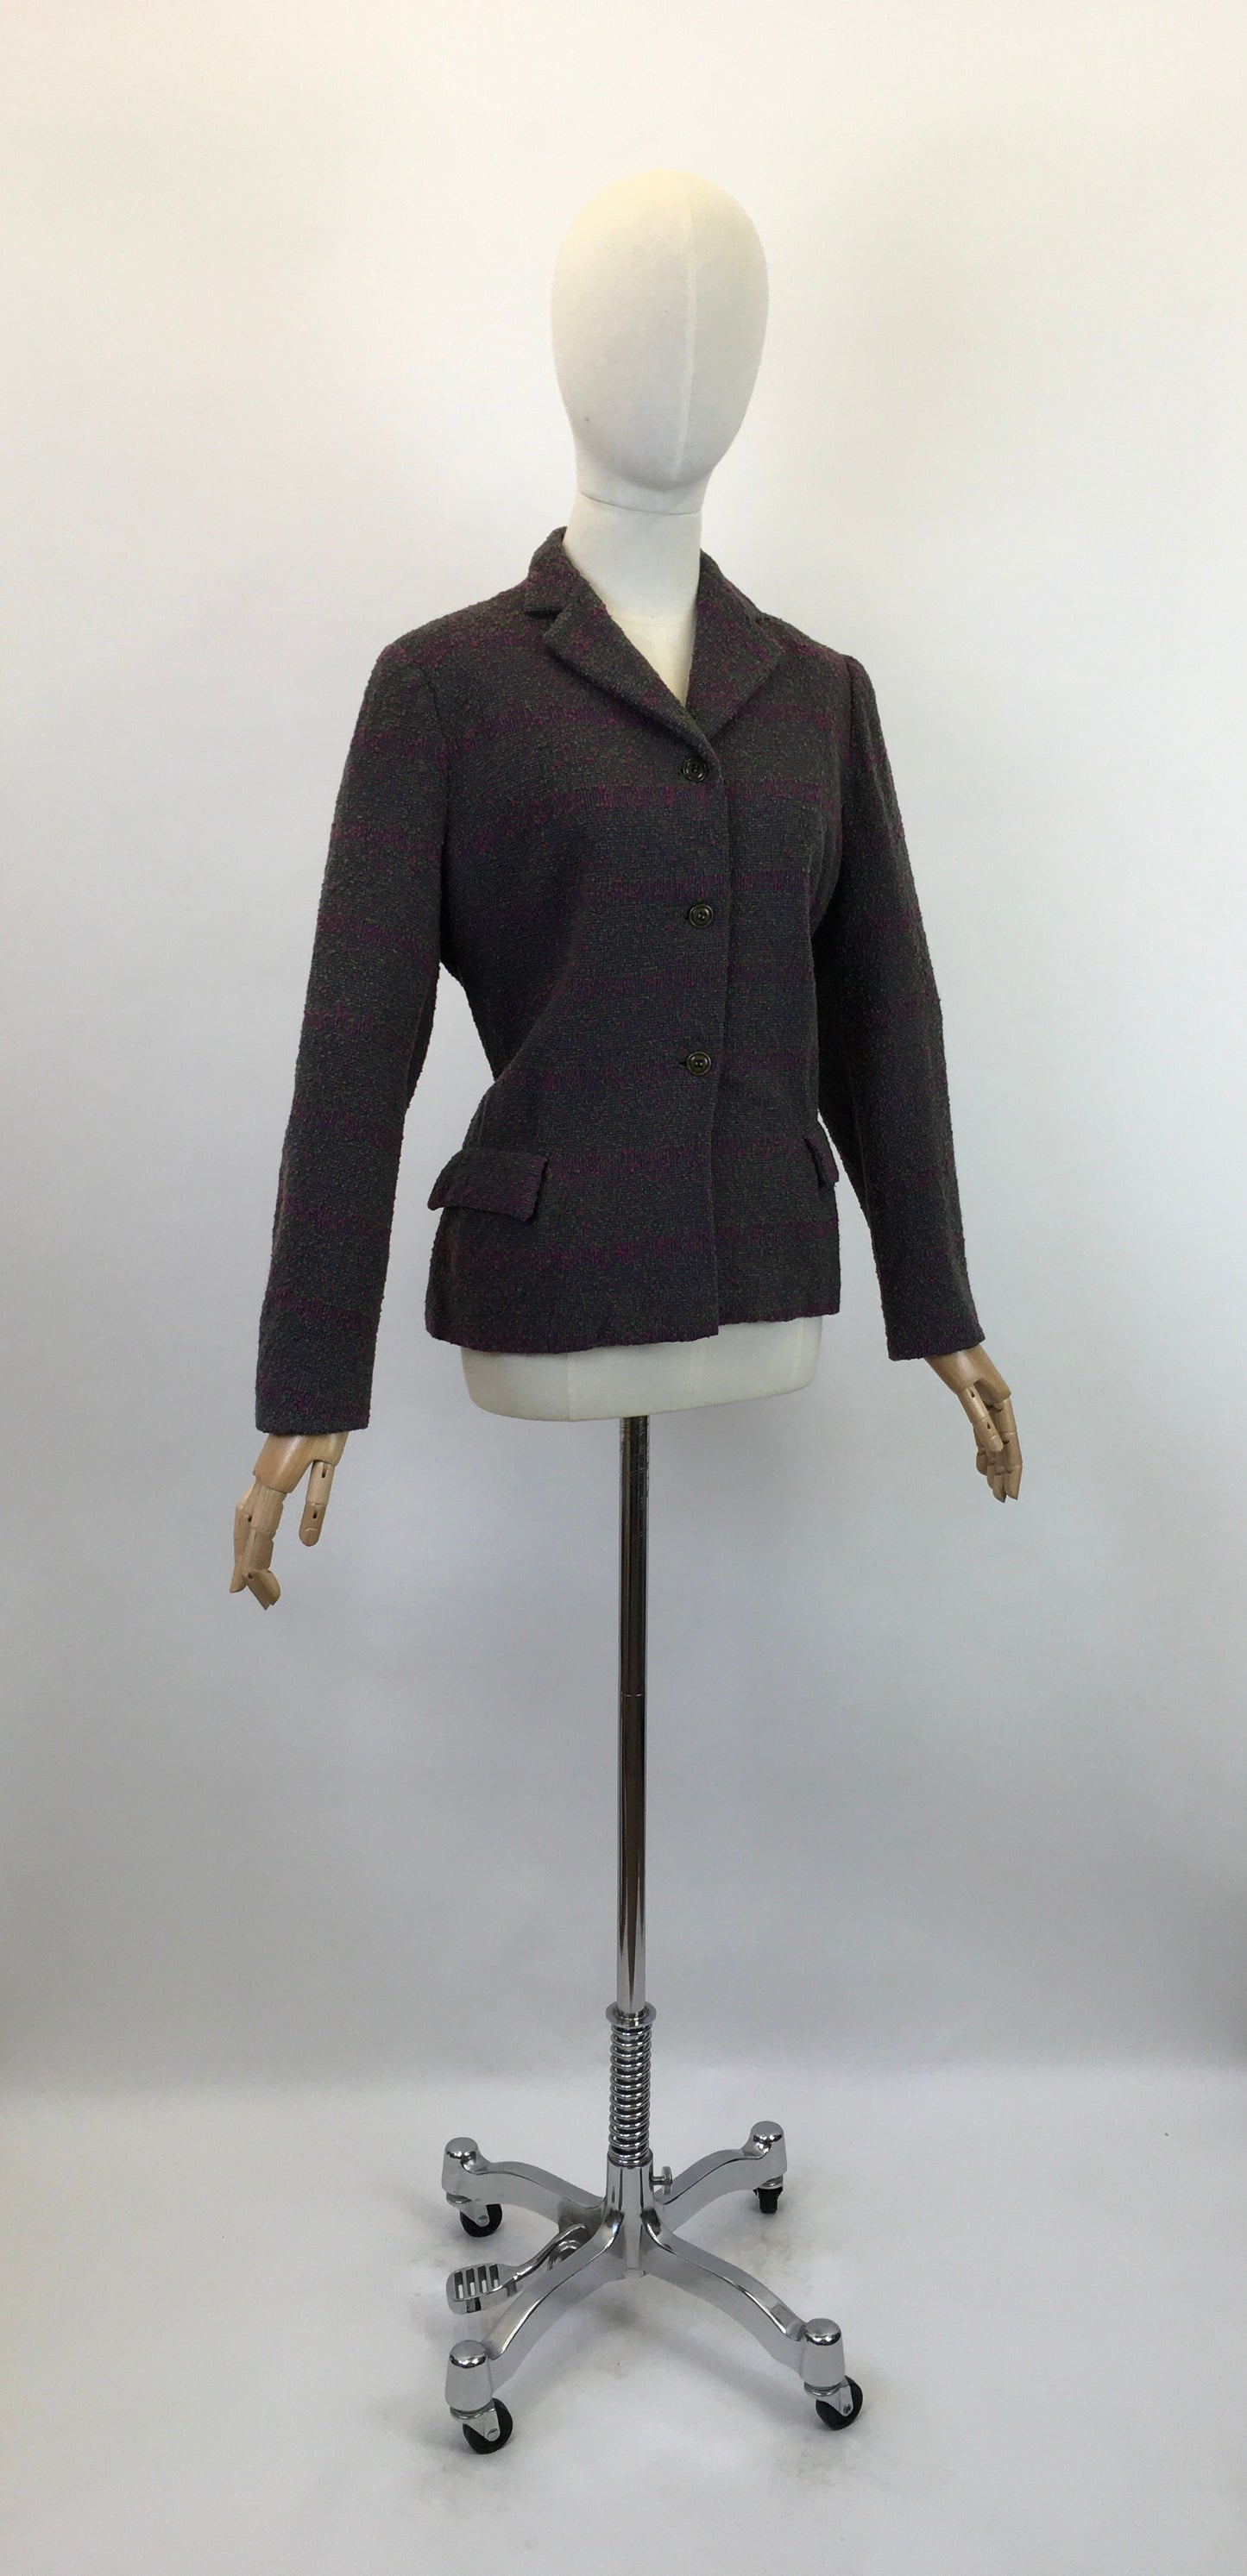 Original 1950's Fabulous Hebe Sports Jacket - In Purples and Greens